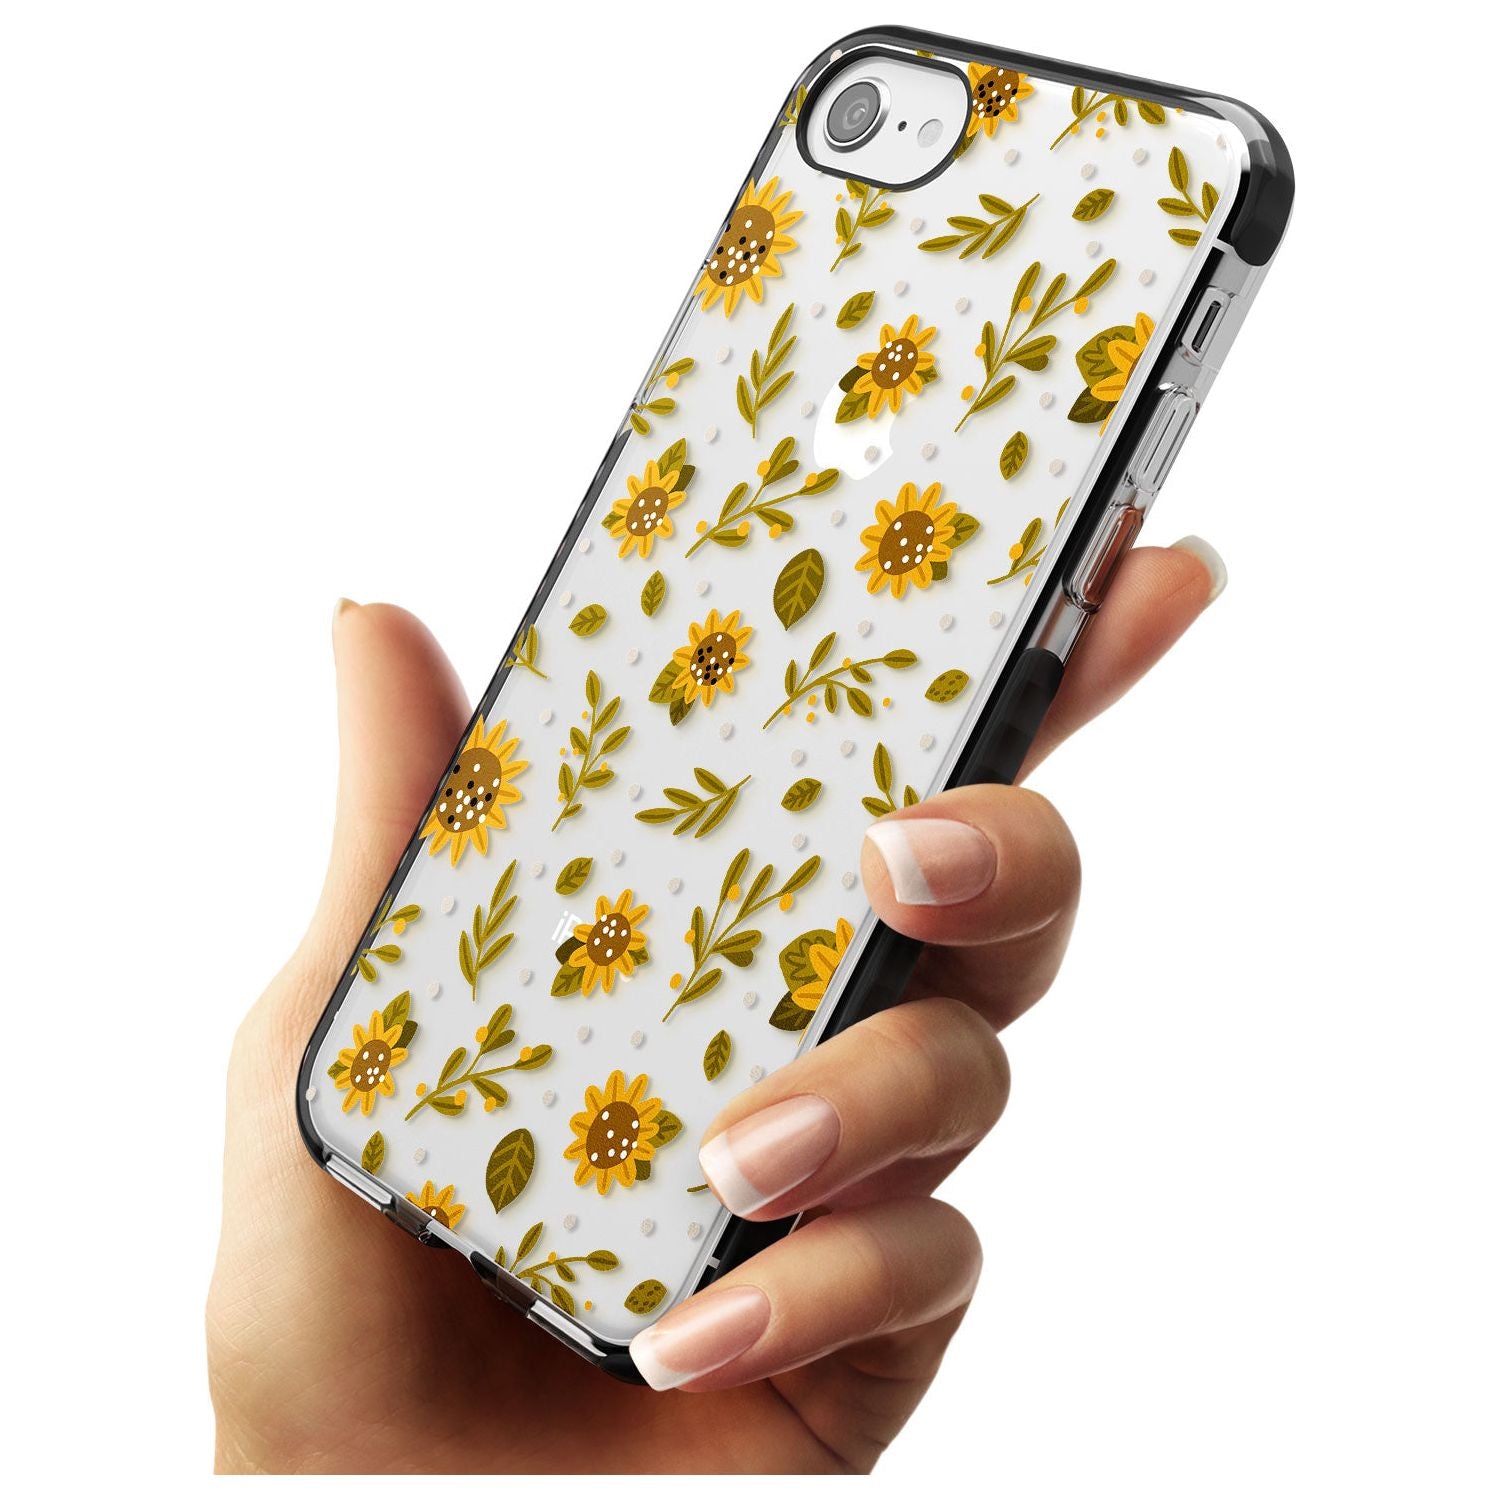 Sweet as Honey Patterns: Sunflowers (Clear) Black Impact Phone Case for iPhone SE 8 7 Plus